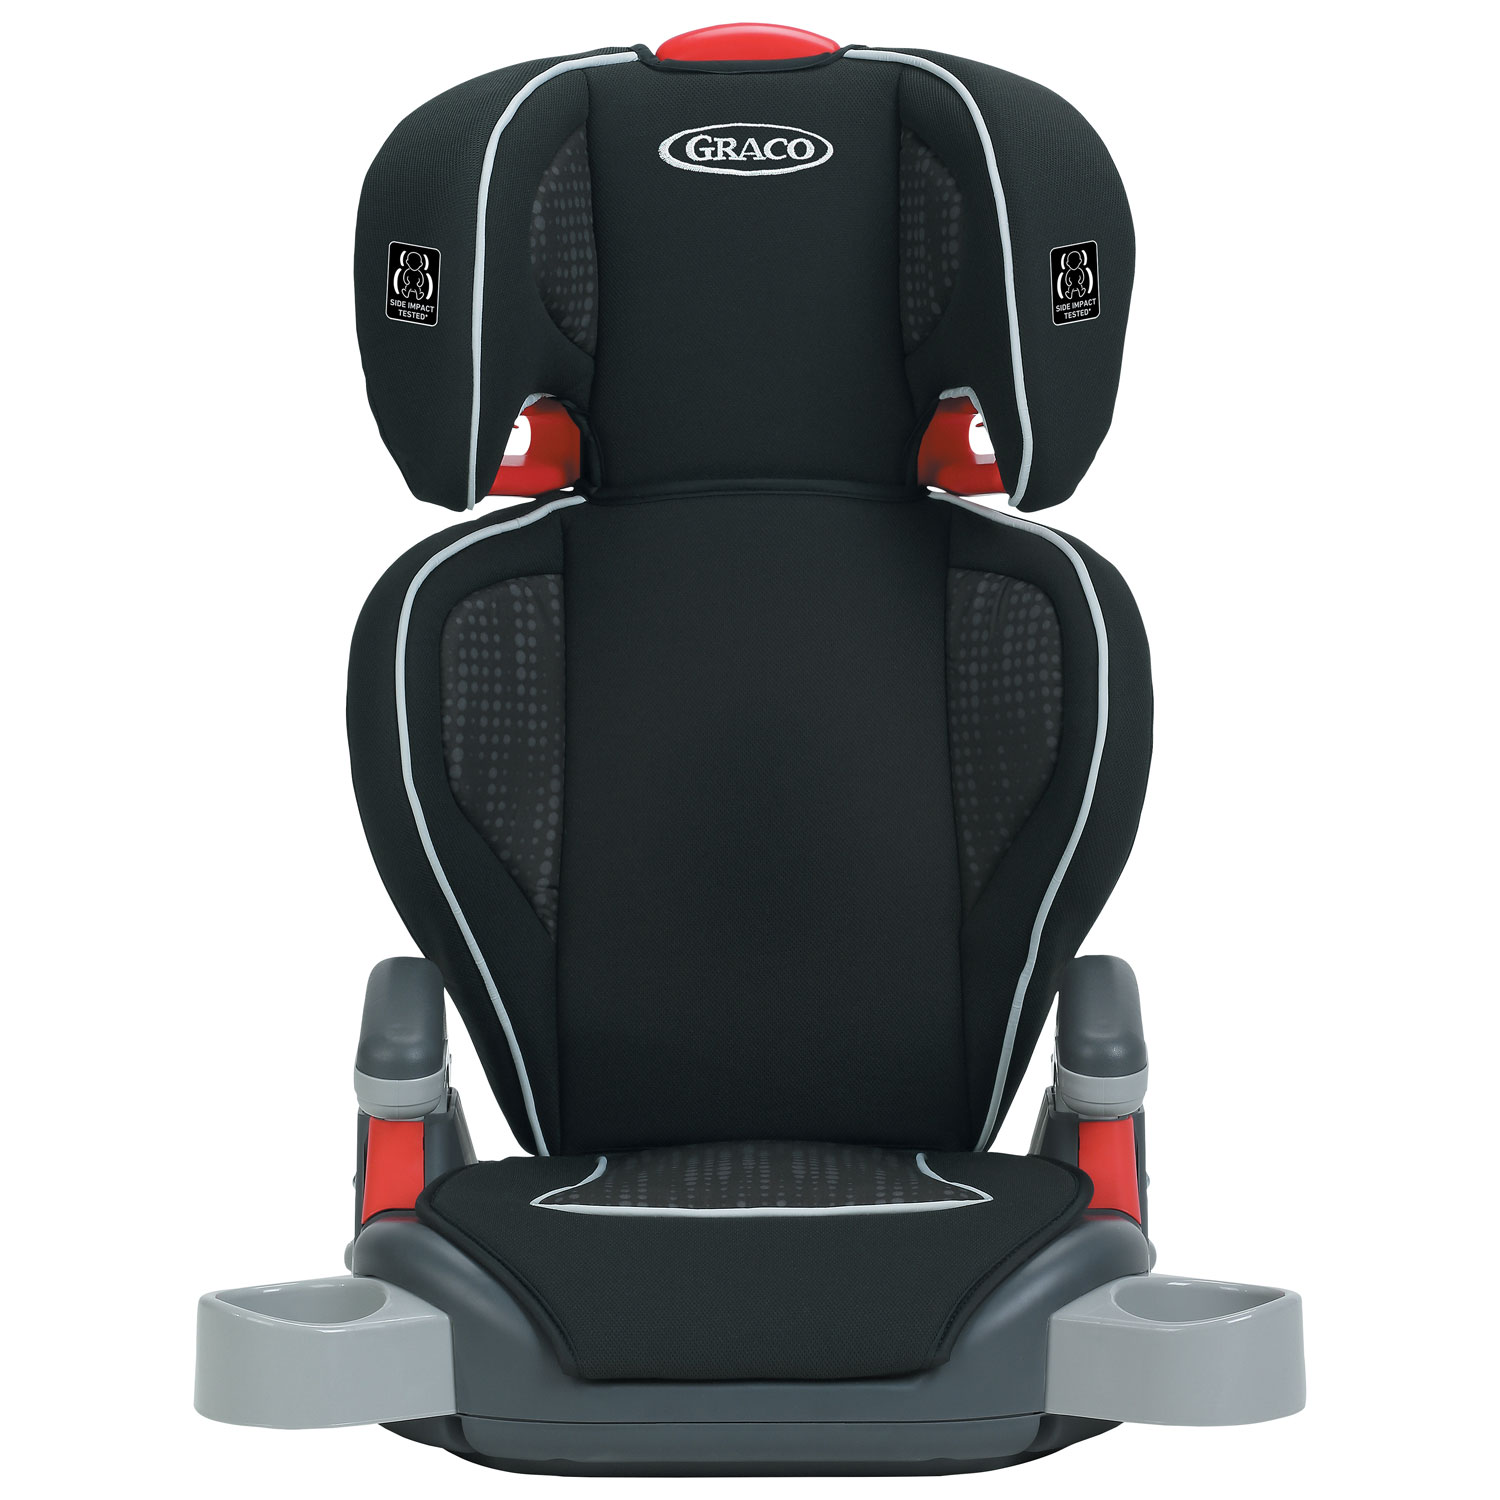 Graco TurboBooster 2-in-1 High Back Booster Seat - Lennon